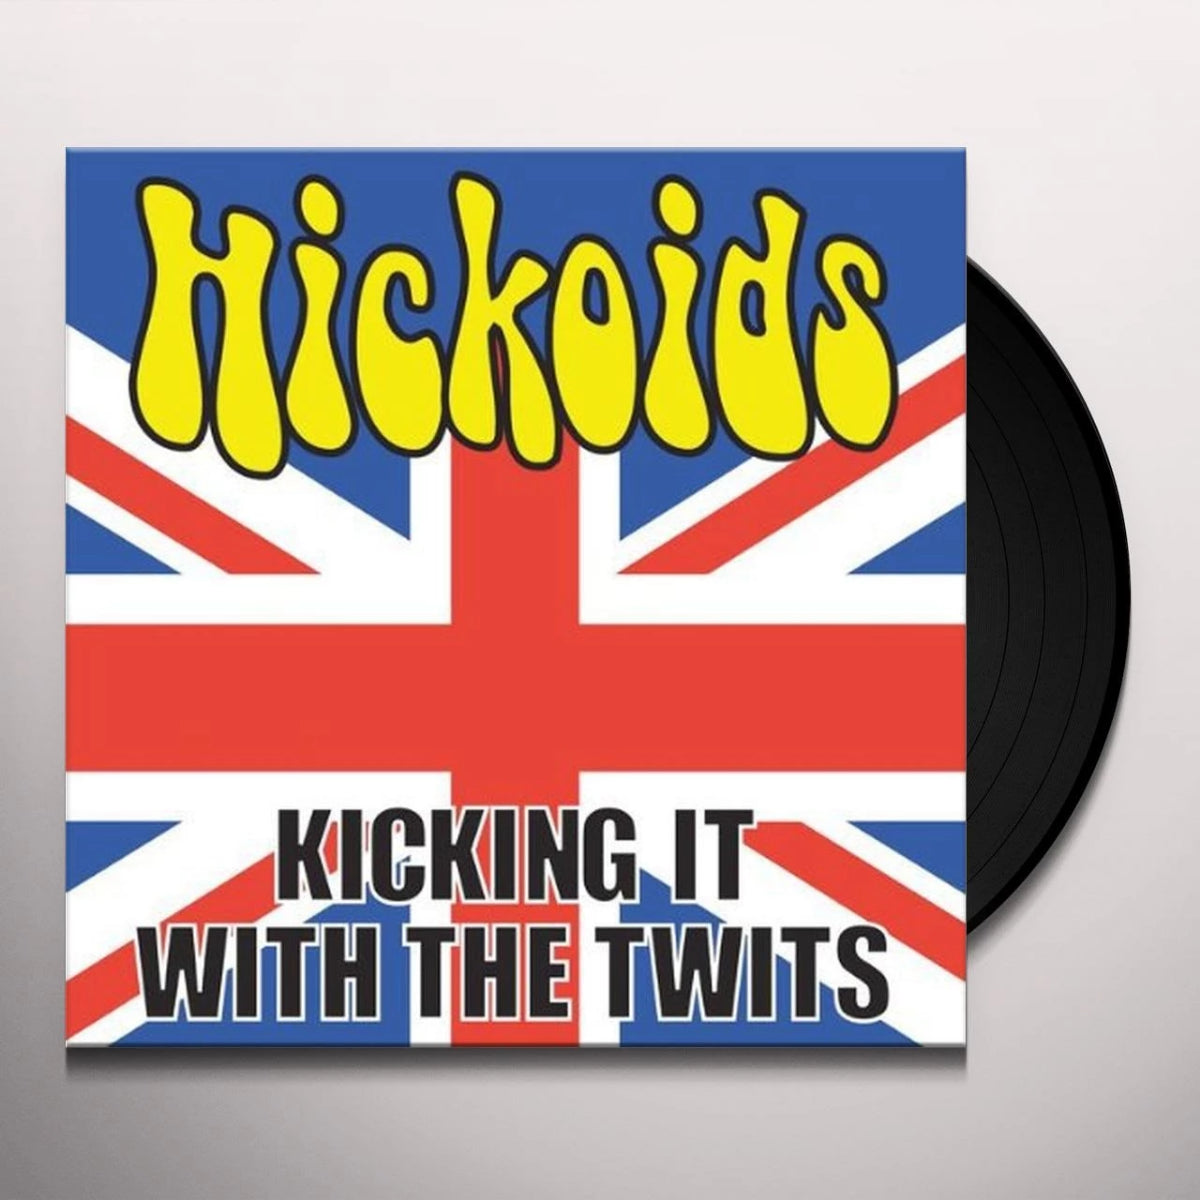 Hickoids- Kickin’ It With The Twits LP